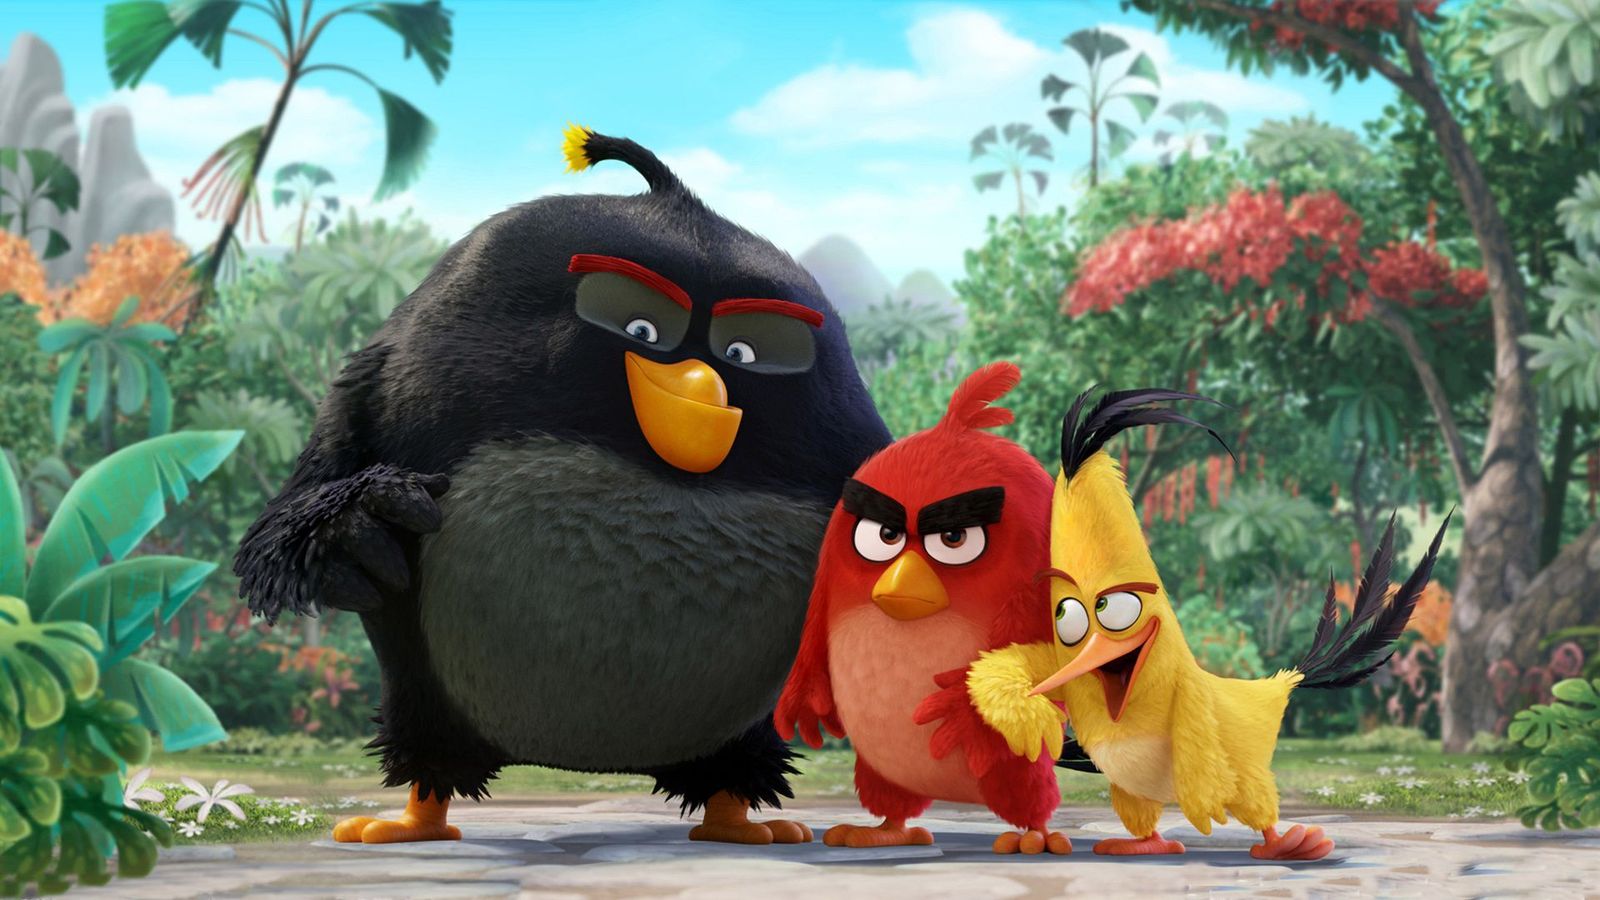 New Angry Birds Movie Trailer Released